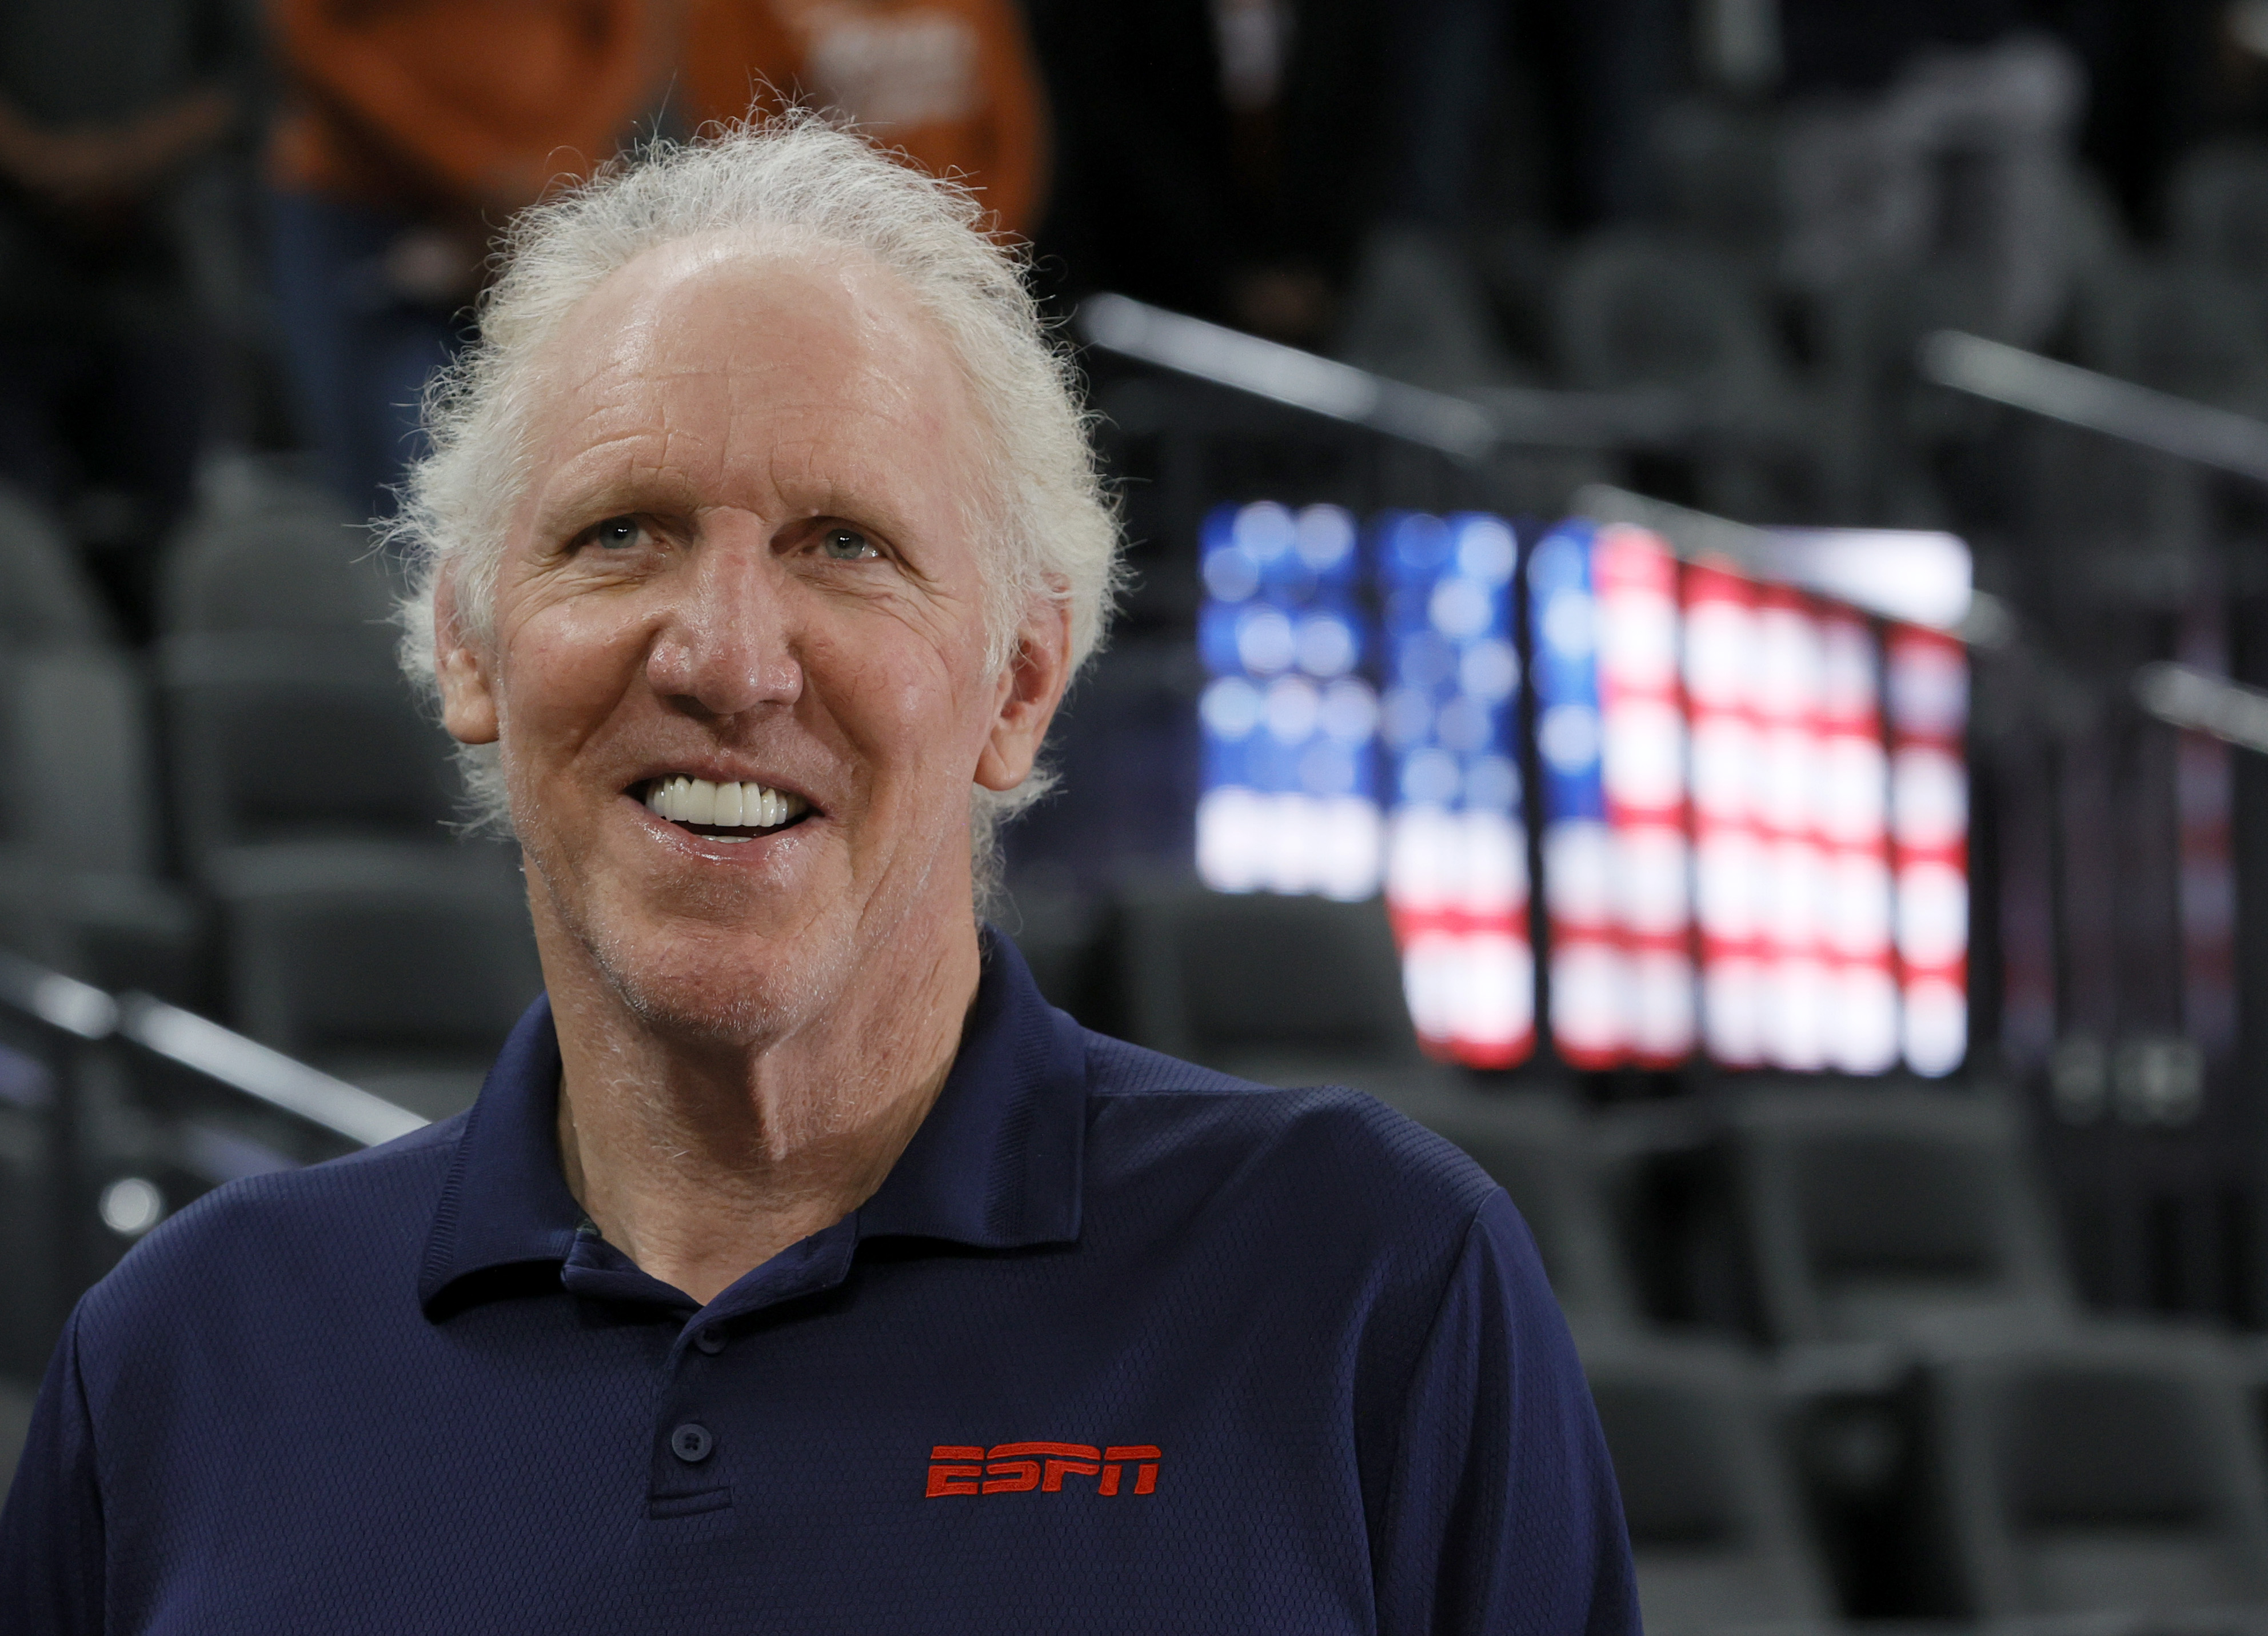 Sportscaster and former NBA player Bill Walton at the Pac-12 Coast-to-Coast Challenge at T-Mobile Arena on Dec. 19, 2021, in Las Vegas.